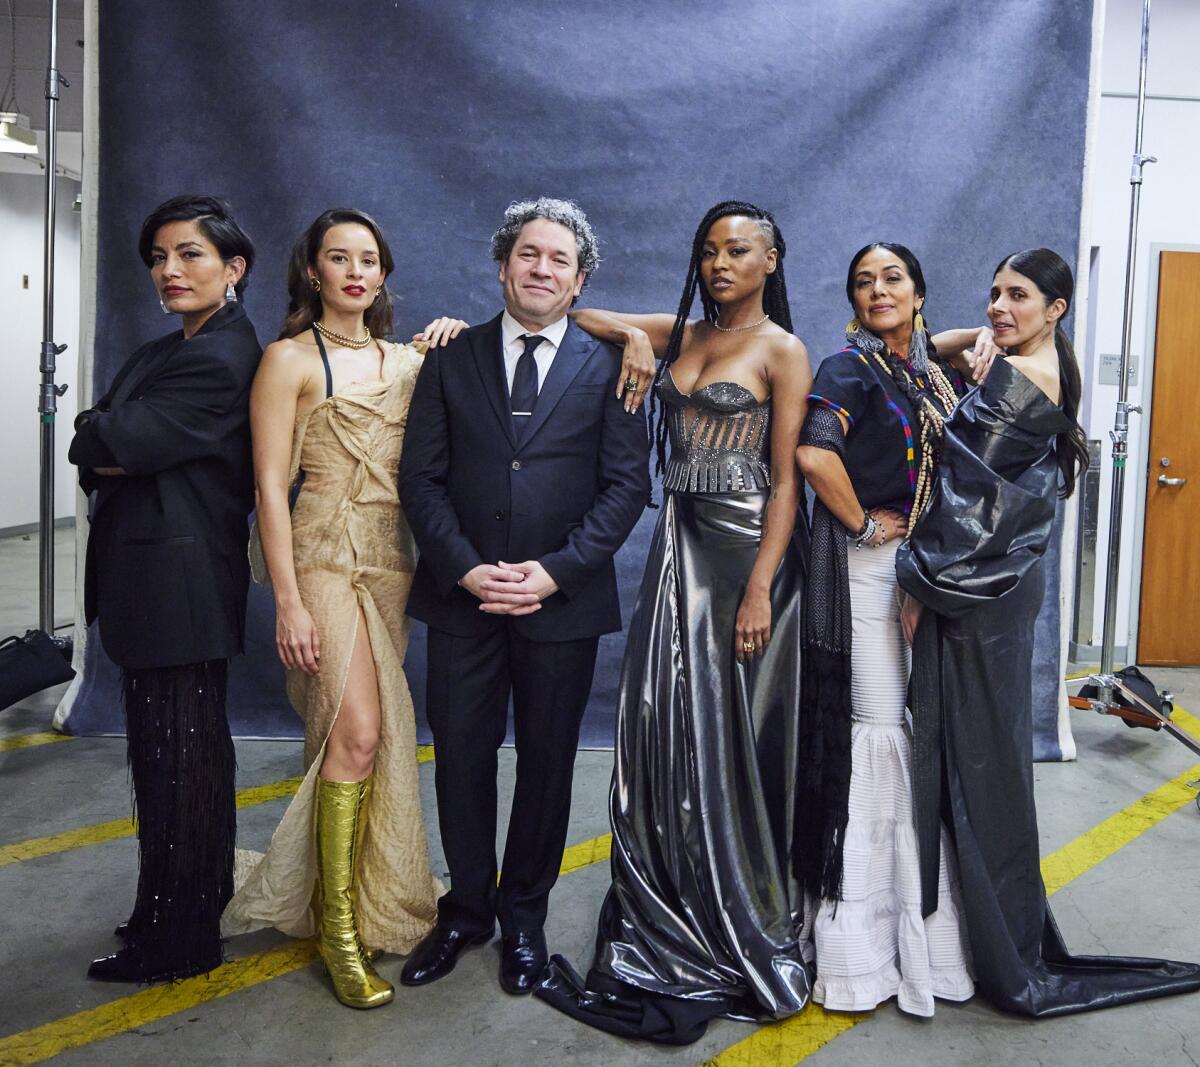 From left are Ana Tijoux, Catalina García, Gustavo Dudamel, Gloria “Goyo” Martínez, Lila Downs and Ely Guerra